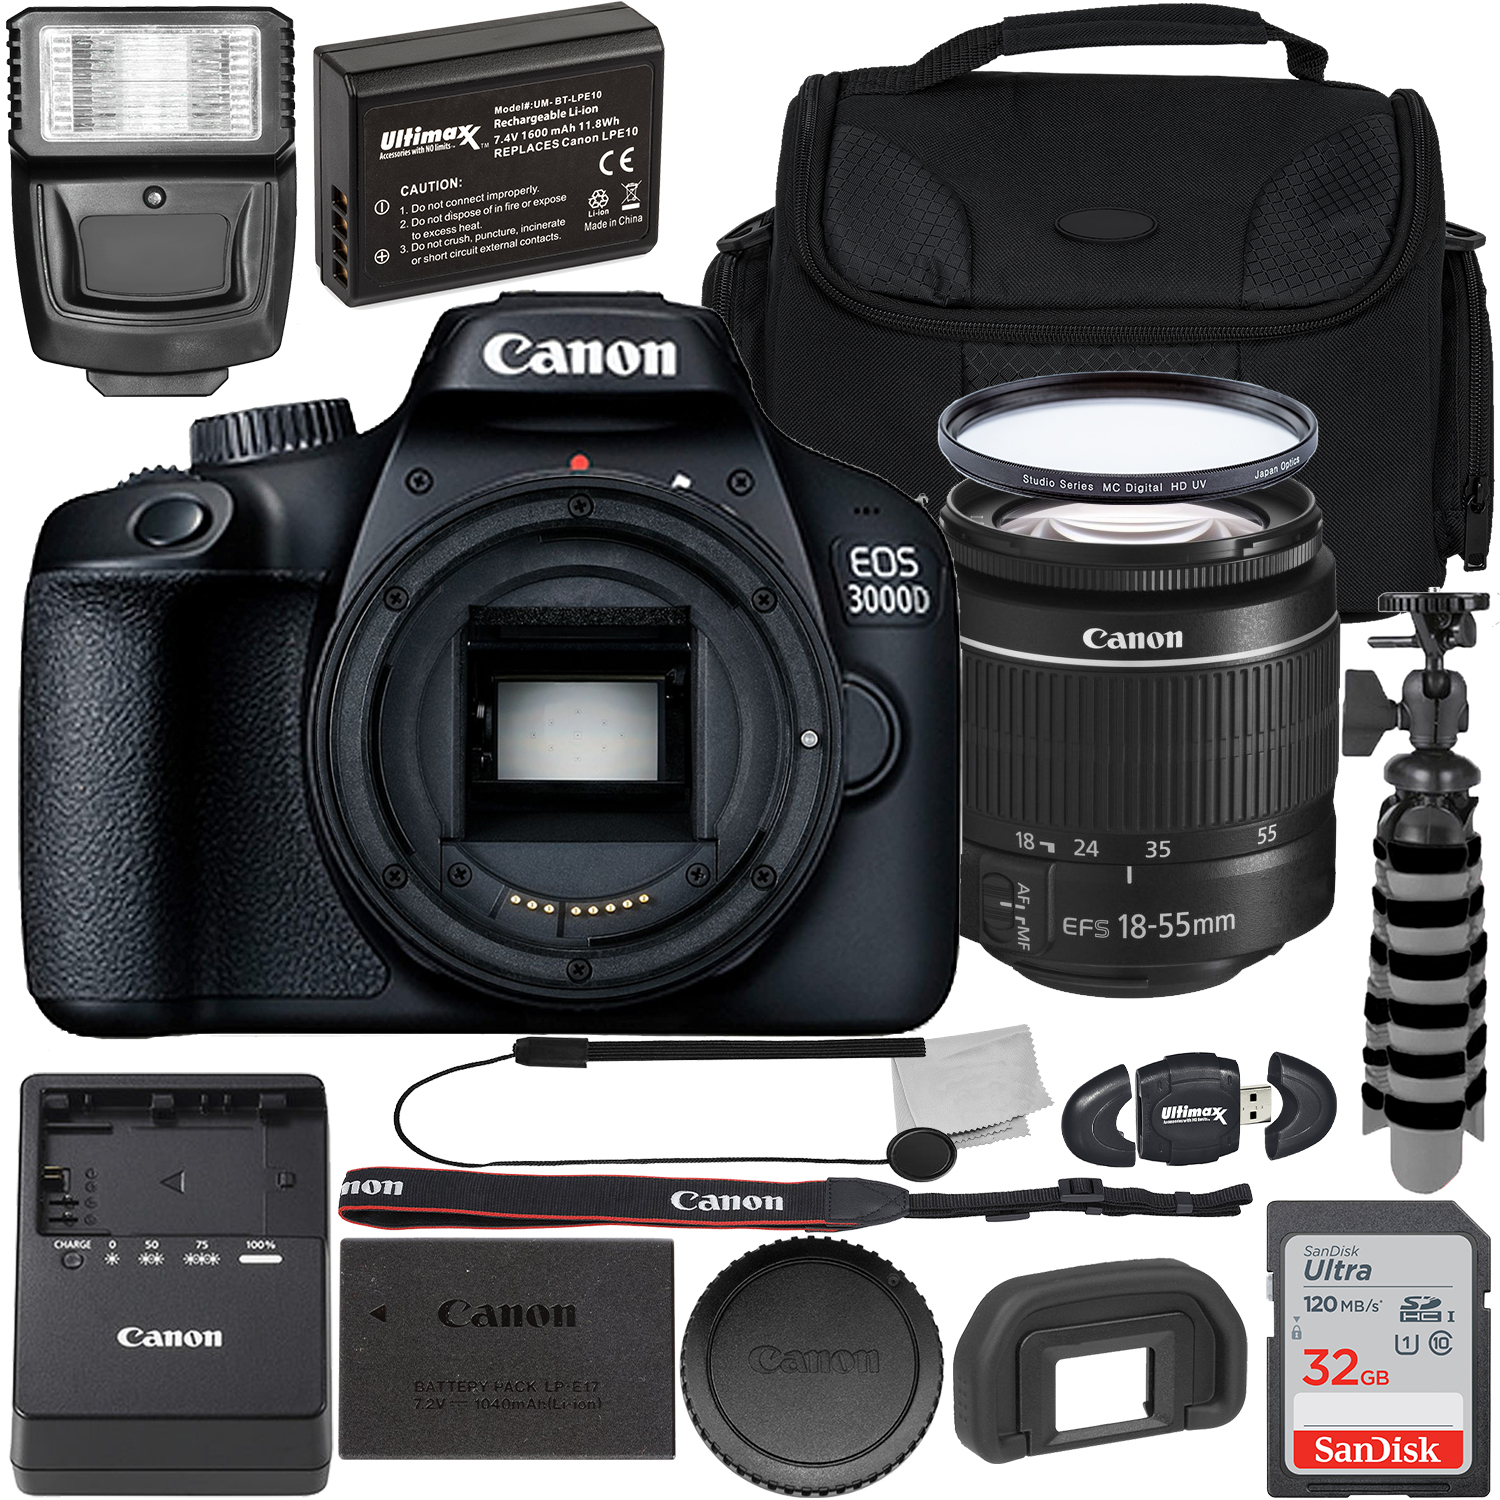 Canon EOS 3000D DSLR Camera with EF-S 18-55mm f/3.5-5.6 III Lens with Accessory Bundle